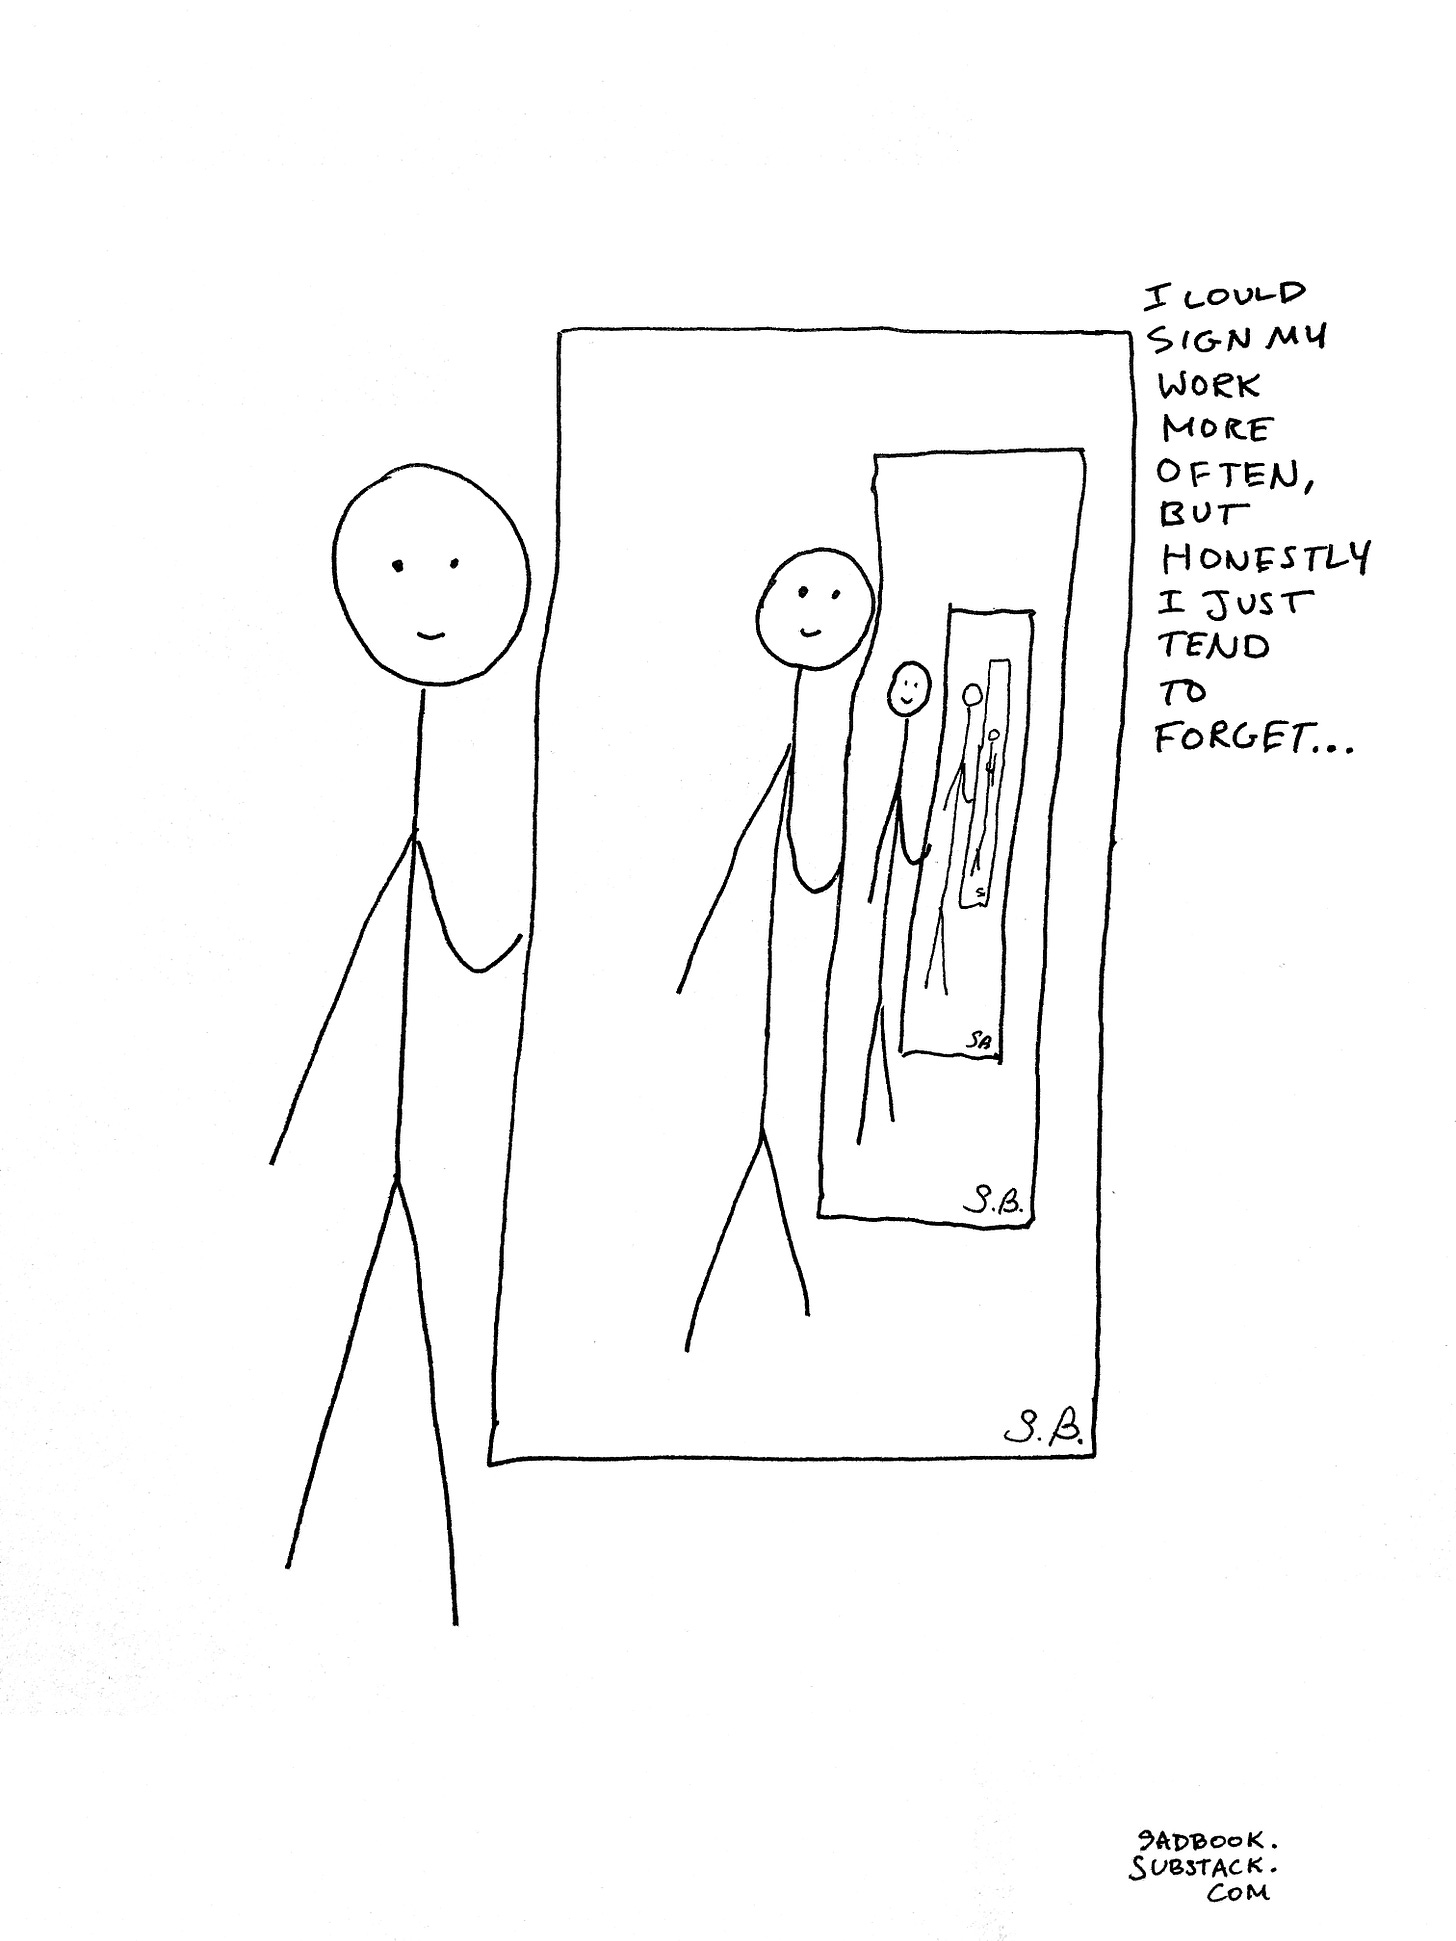 artist humor sign your work stick figure pictures